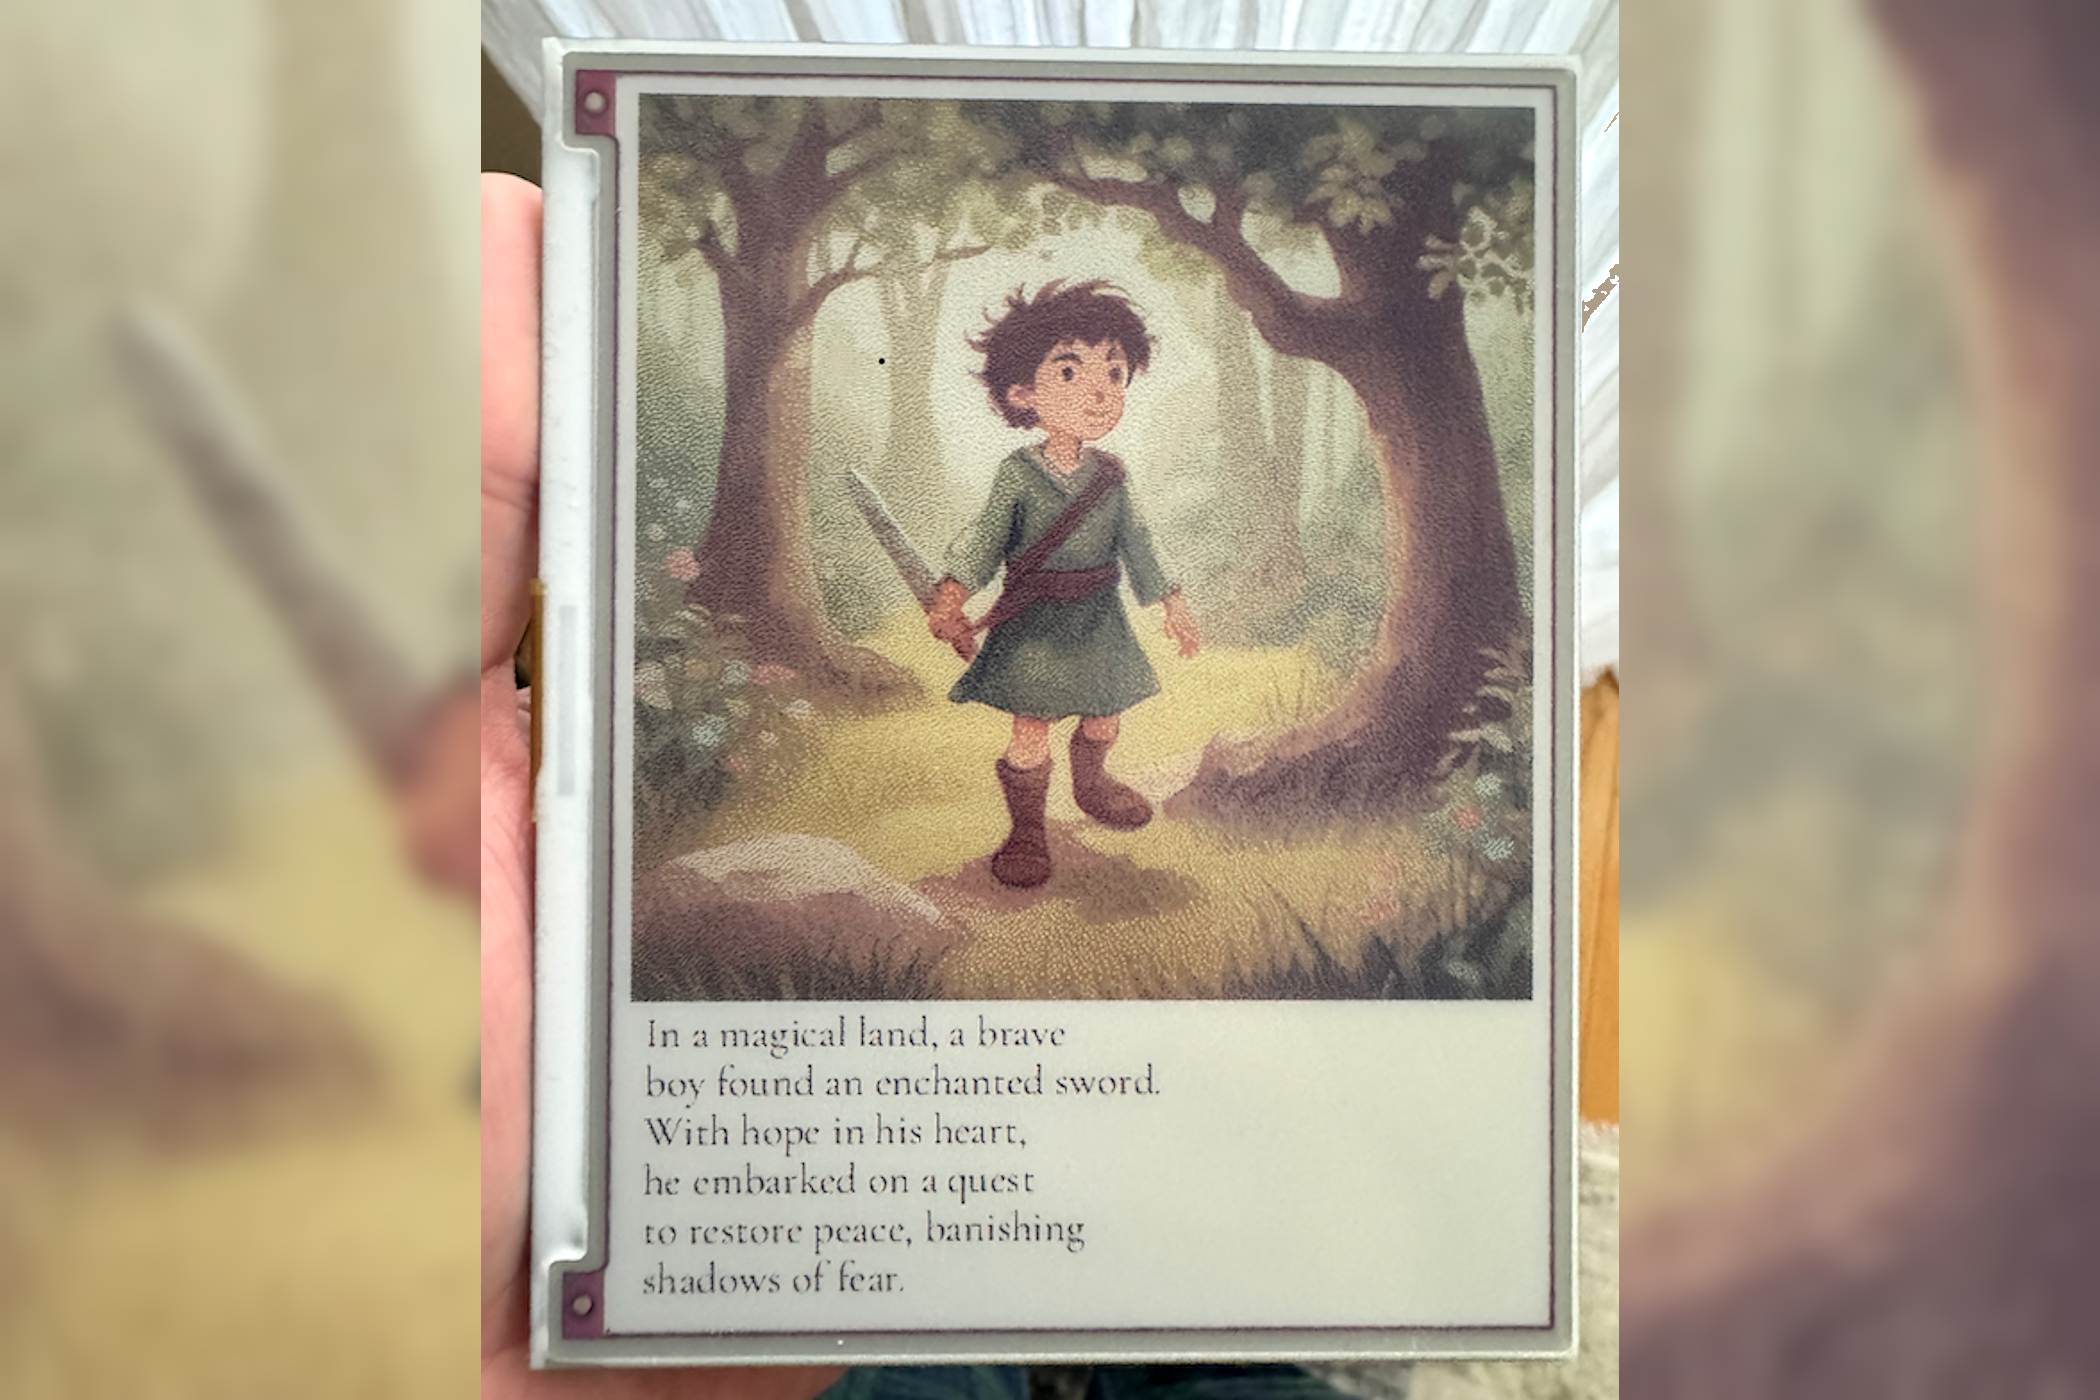 This cool Raspberry Pi-powered storybook automatically generates stories on an eInk display